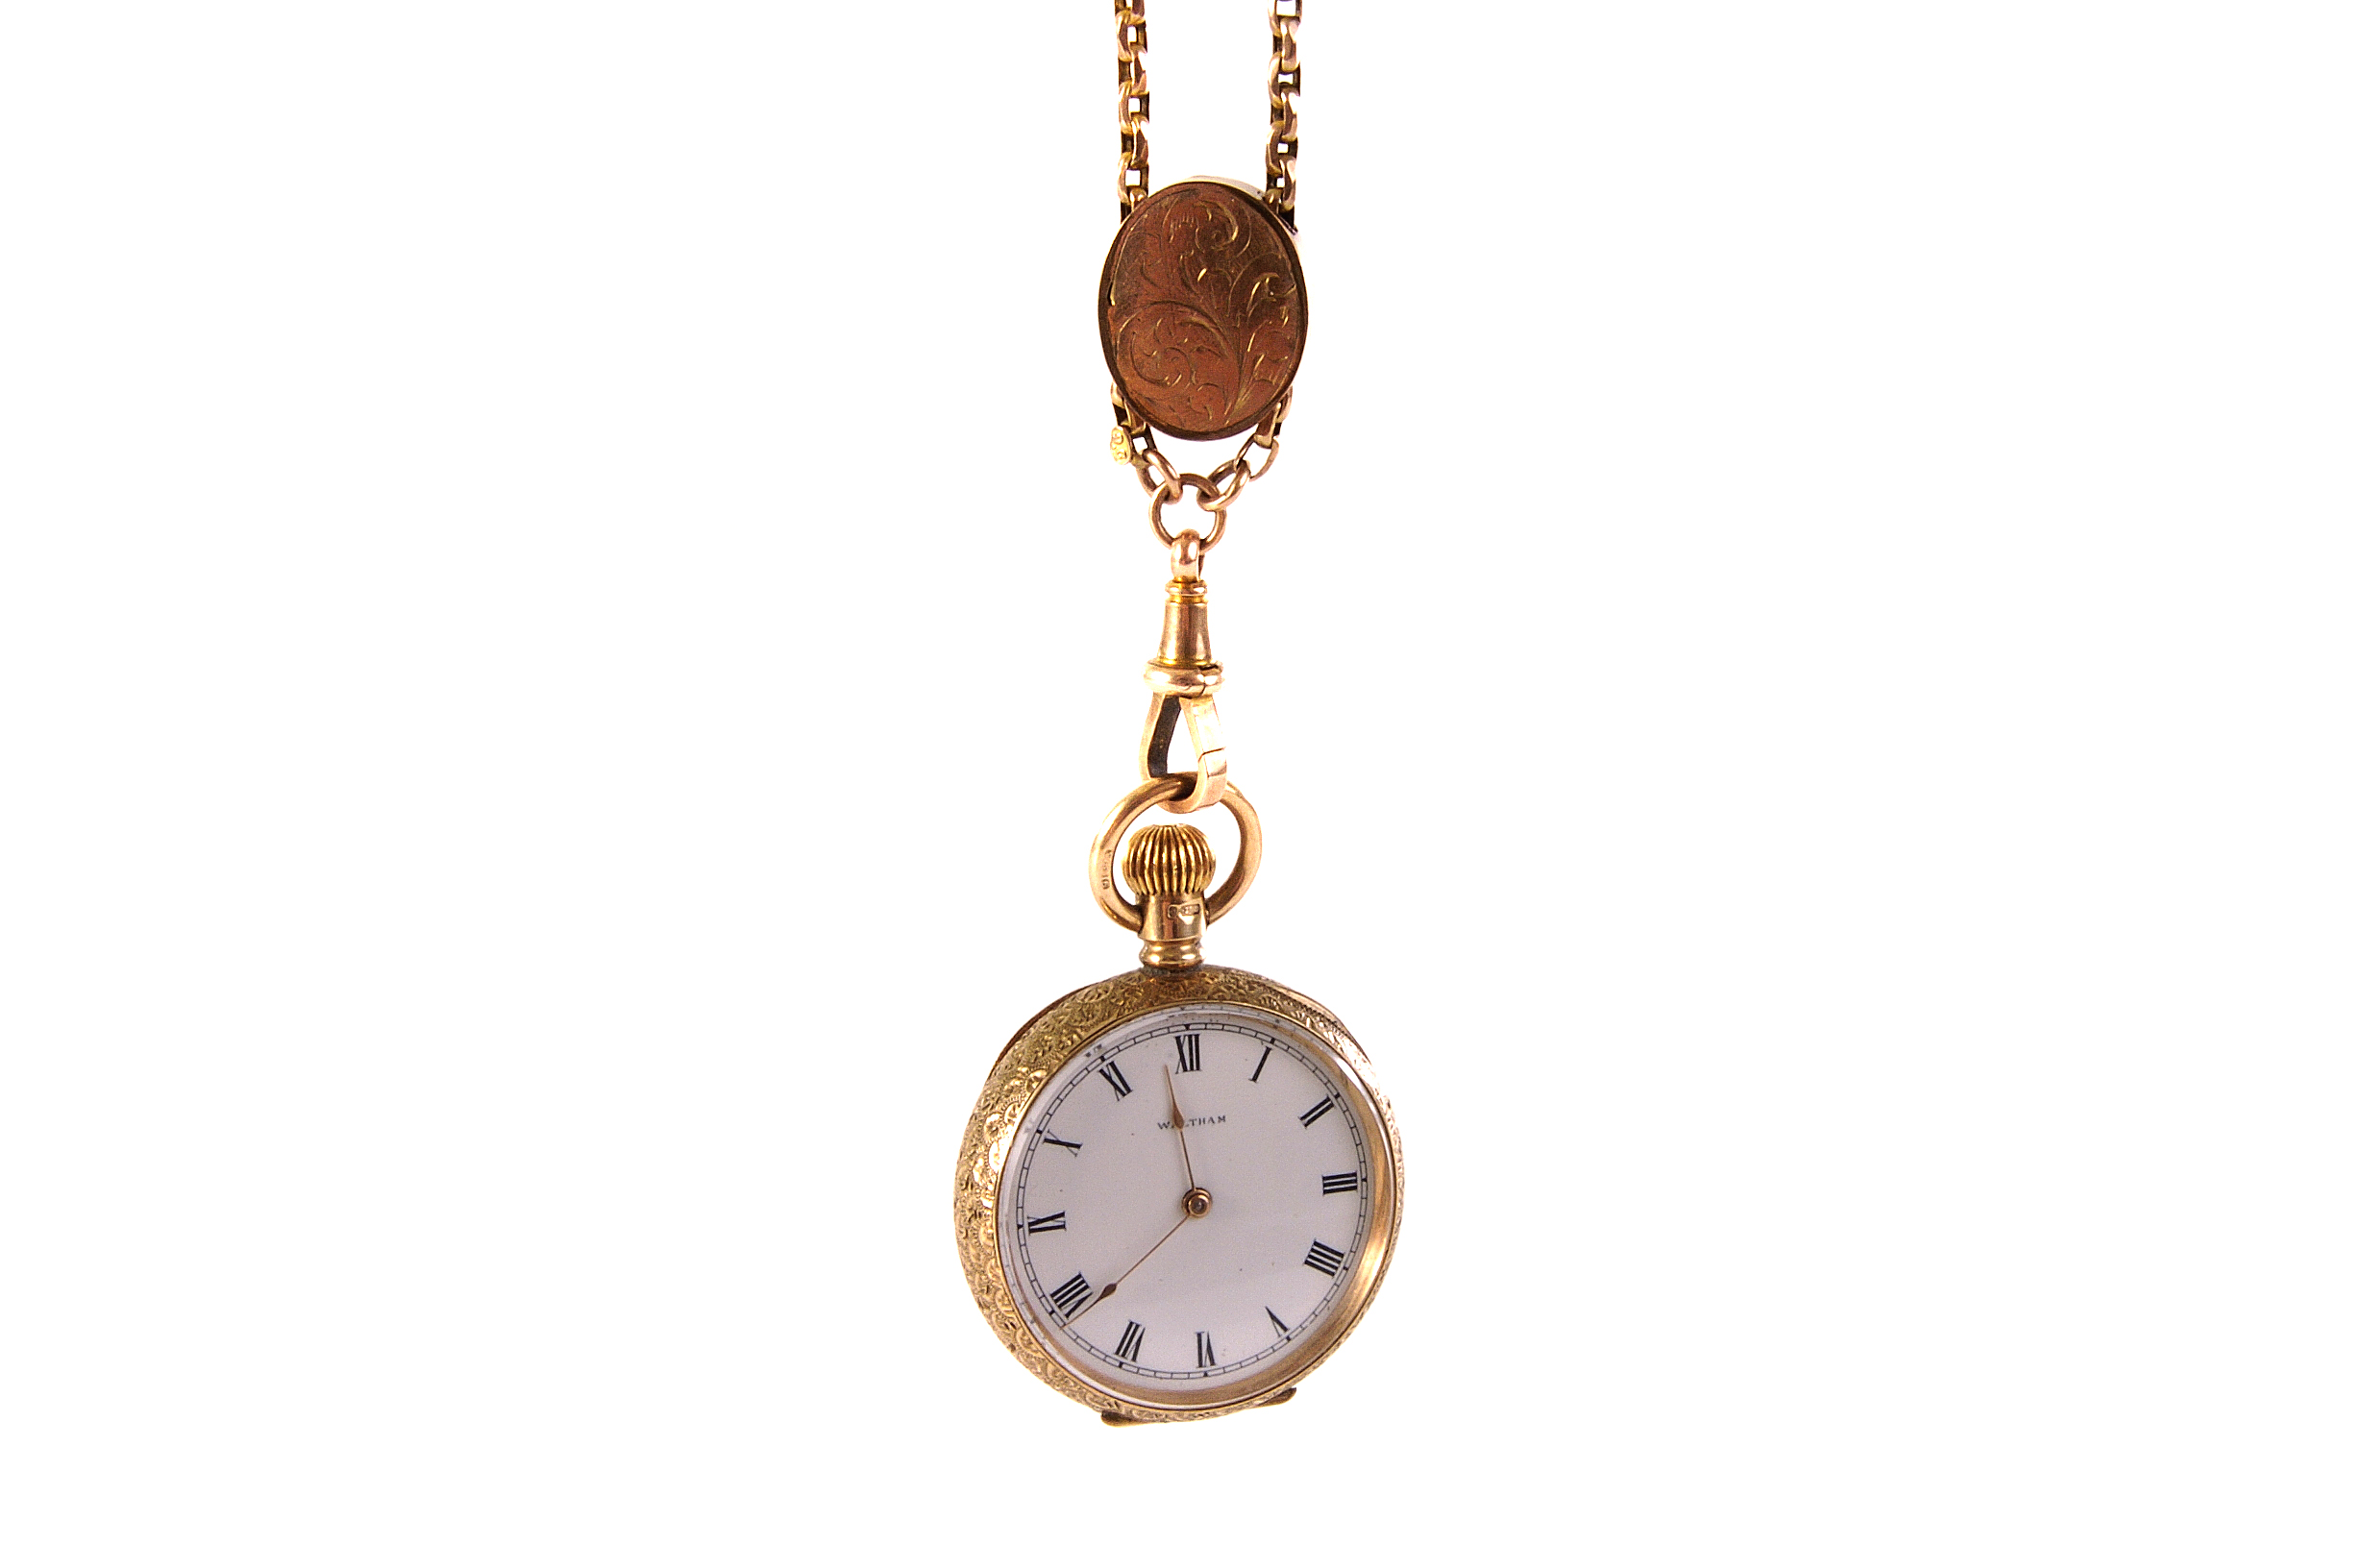 A 9ct gold Waltham open faced fob watch, on long 9ct gold necklace chain, chain approx 22g